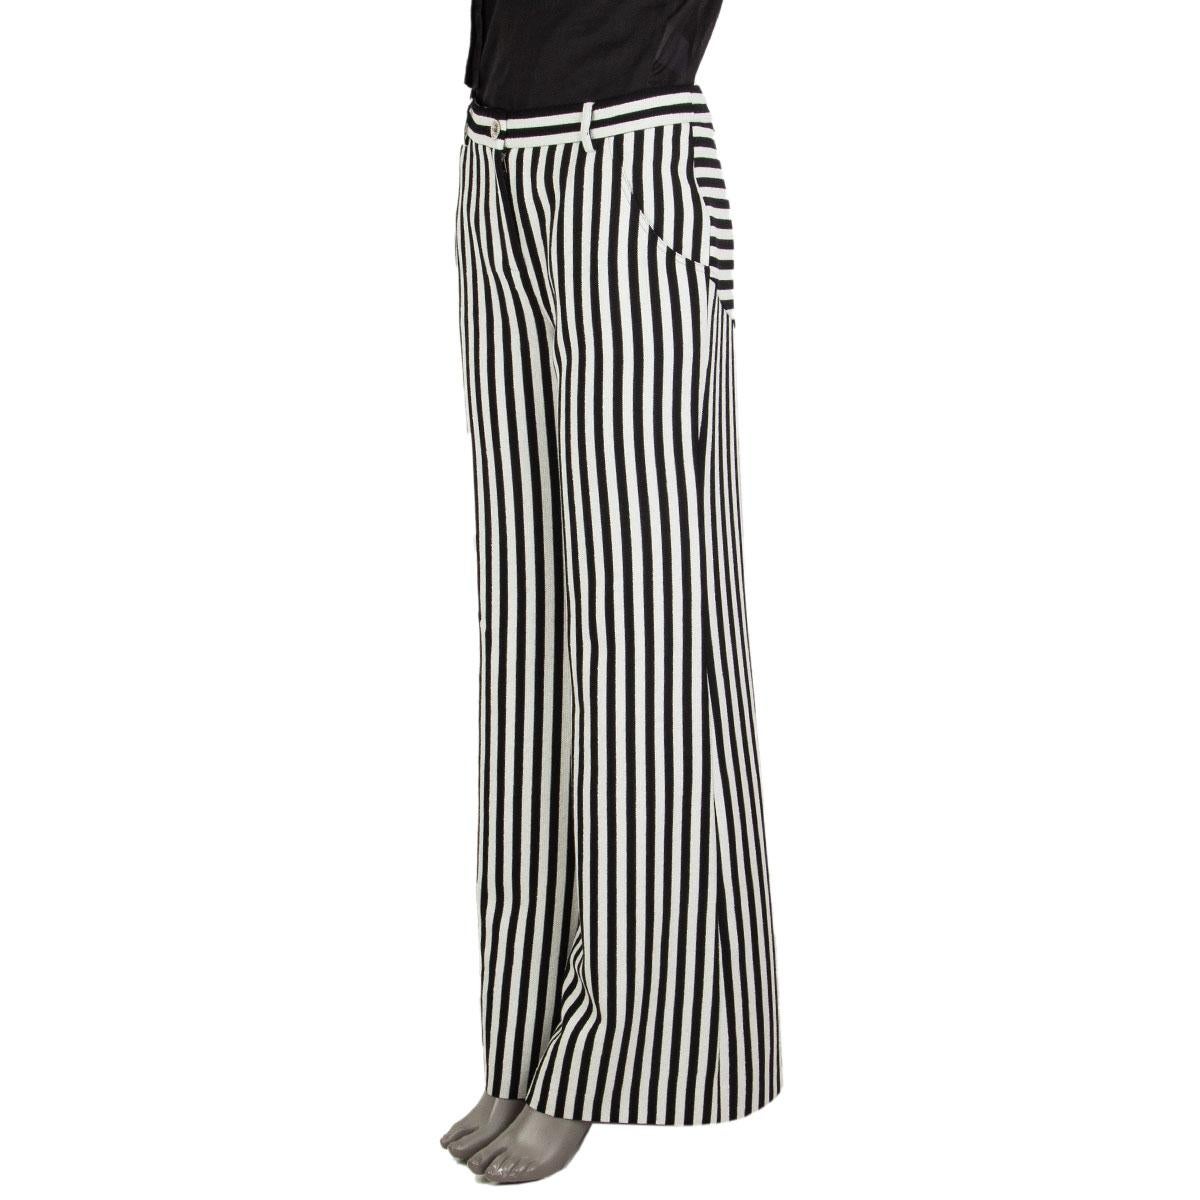 100% authentic Chanel Cruise collection 2019 La Pausa striped wide-leg pants in black&white wool (72%), polyamid (20%) and viscose (8%). Closes with a logo embossed button and a zipper on the front and with pockets. Unlined. Has been worn and is in